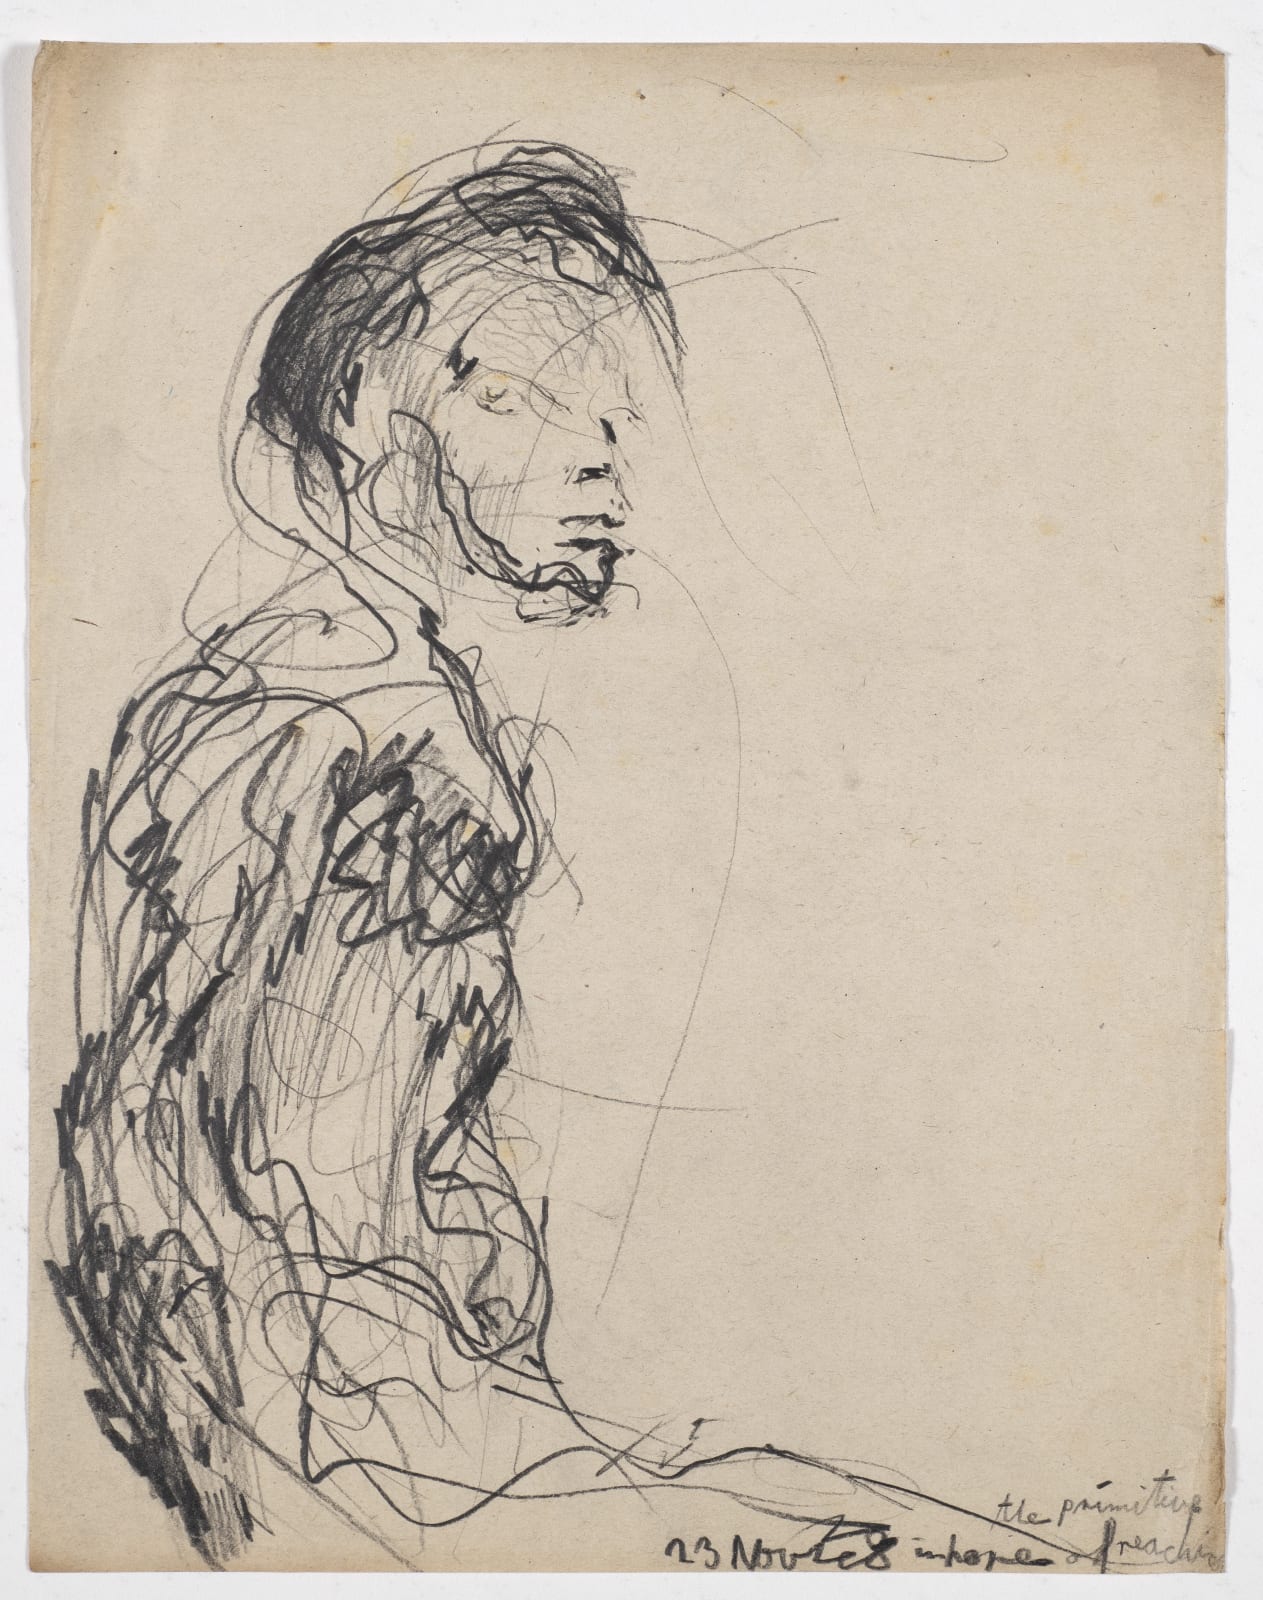 Seated Figure, 23 Nov 48, ‘in search of reaching the primitive’ Pencil on paper 17.5 x 21.2cm The Gustav Metzger Foundation